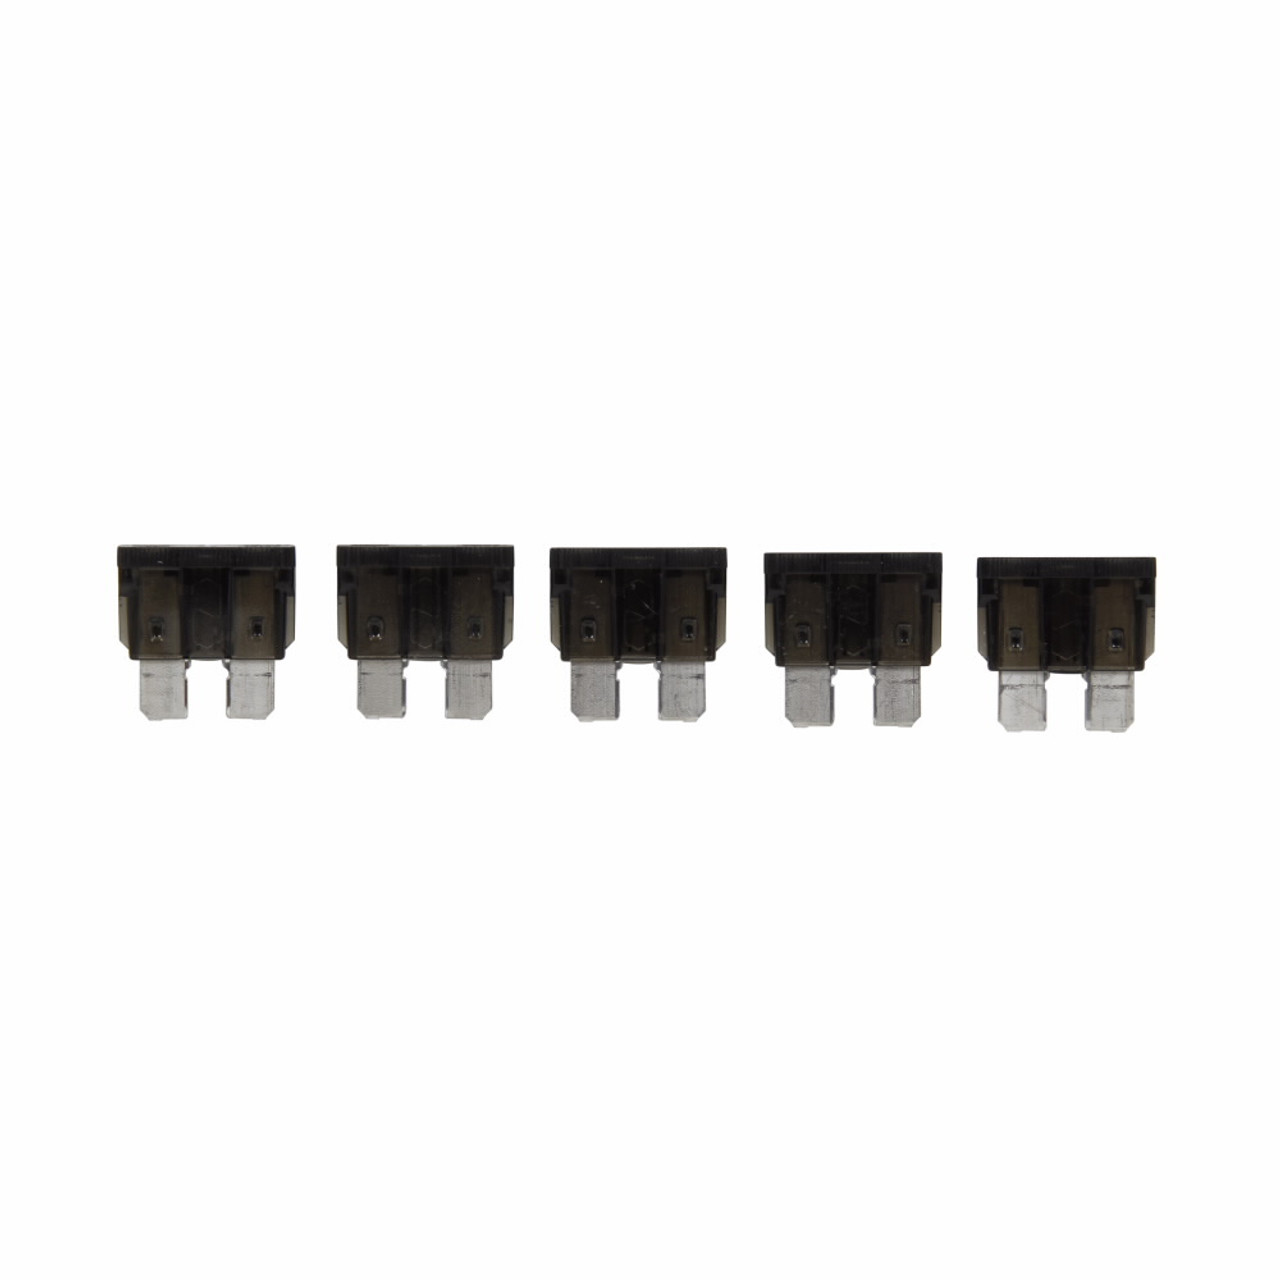 ATC/ATO Blade Fuse, 1 Amp, Pack of 5